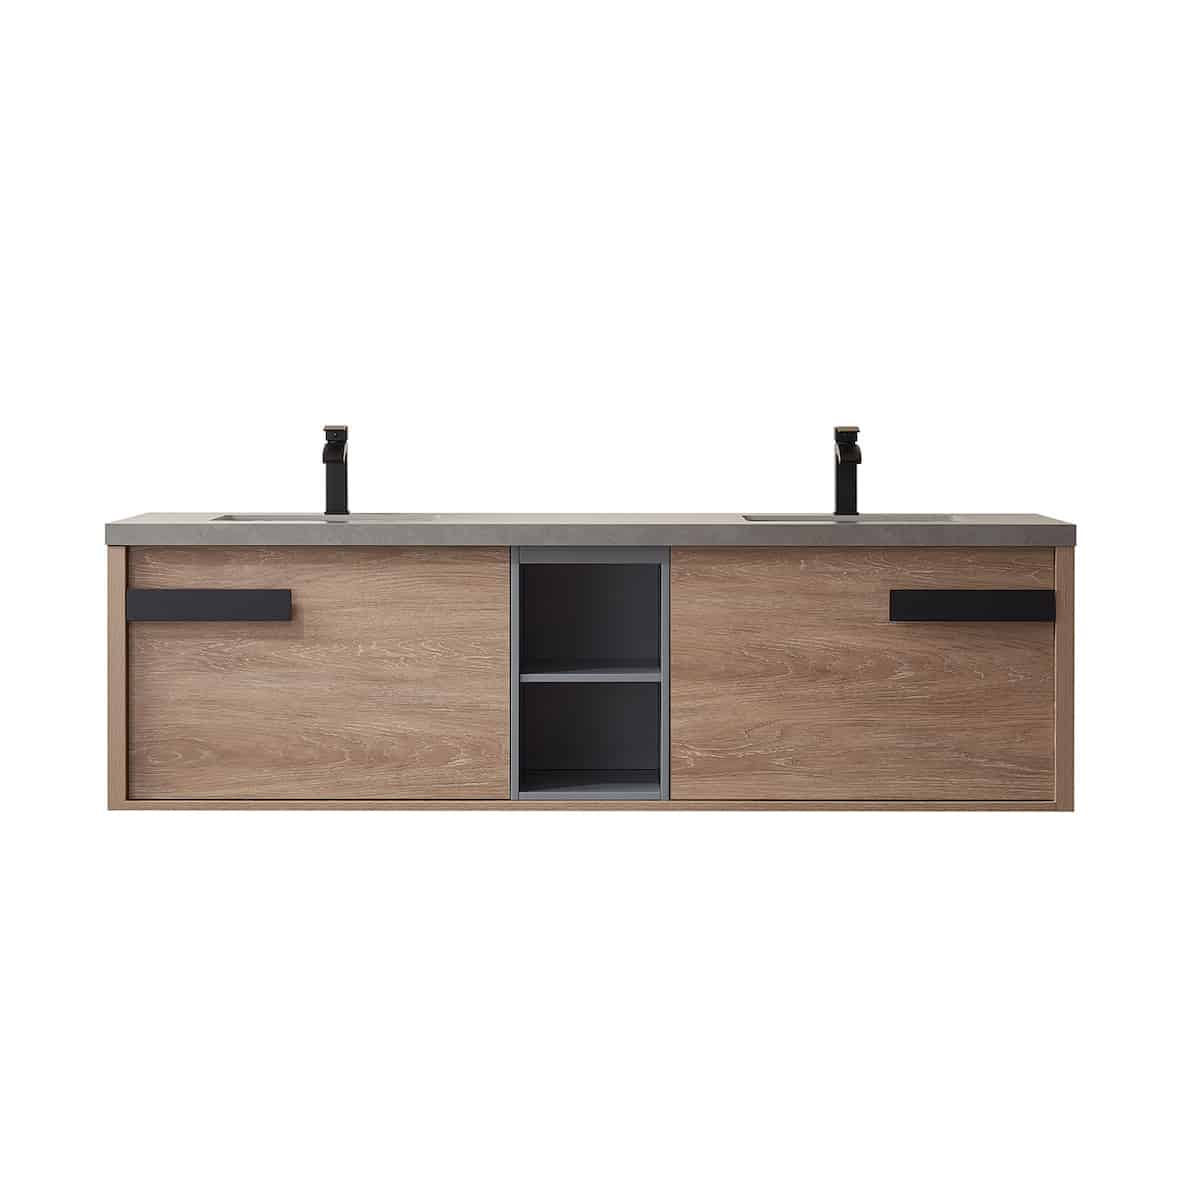 Vinnova Carcastillo 72 Inch Wall Mount Double Sink Bath Vanity in North American Oak with Grey Sintered Stone Top Without Mirror 703272-NO-WK-NM #mirror_without mirror